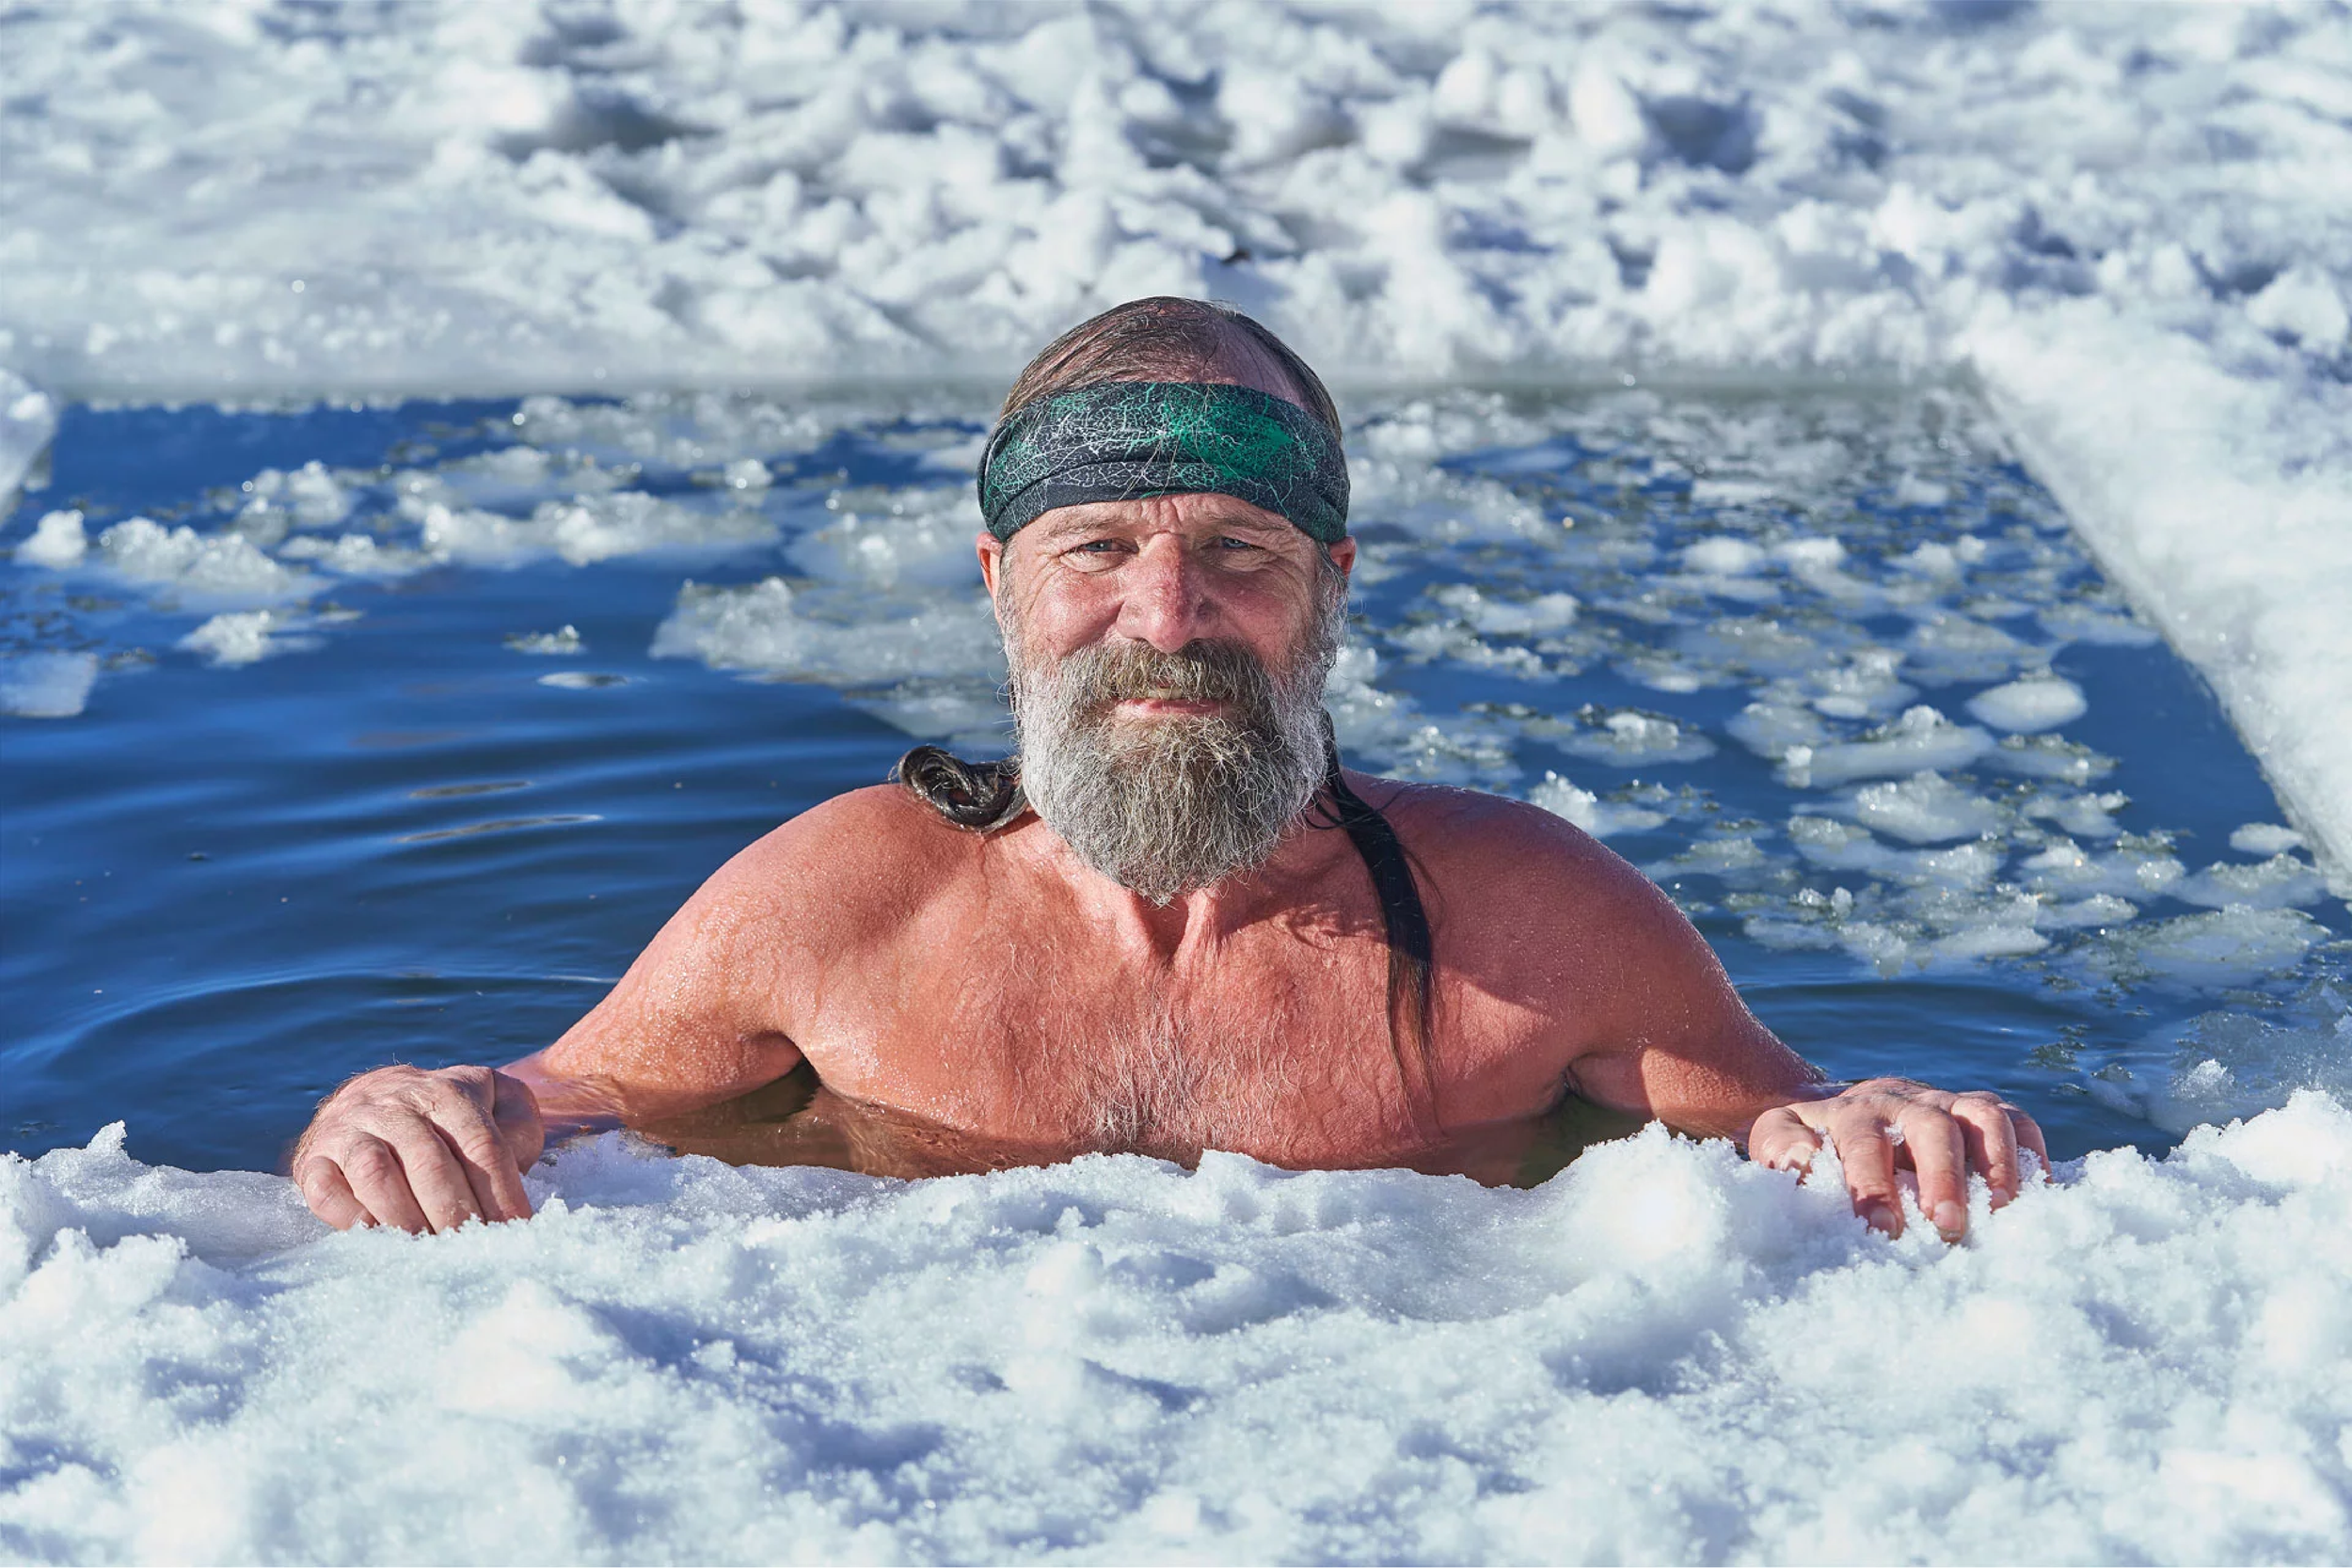 Challenging yourself with the Wim Hof Method